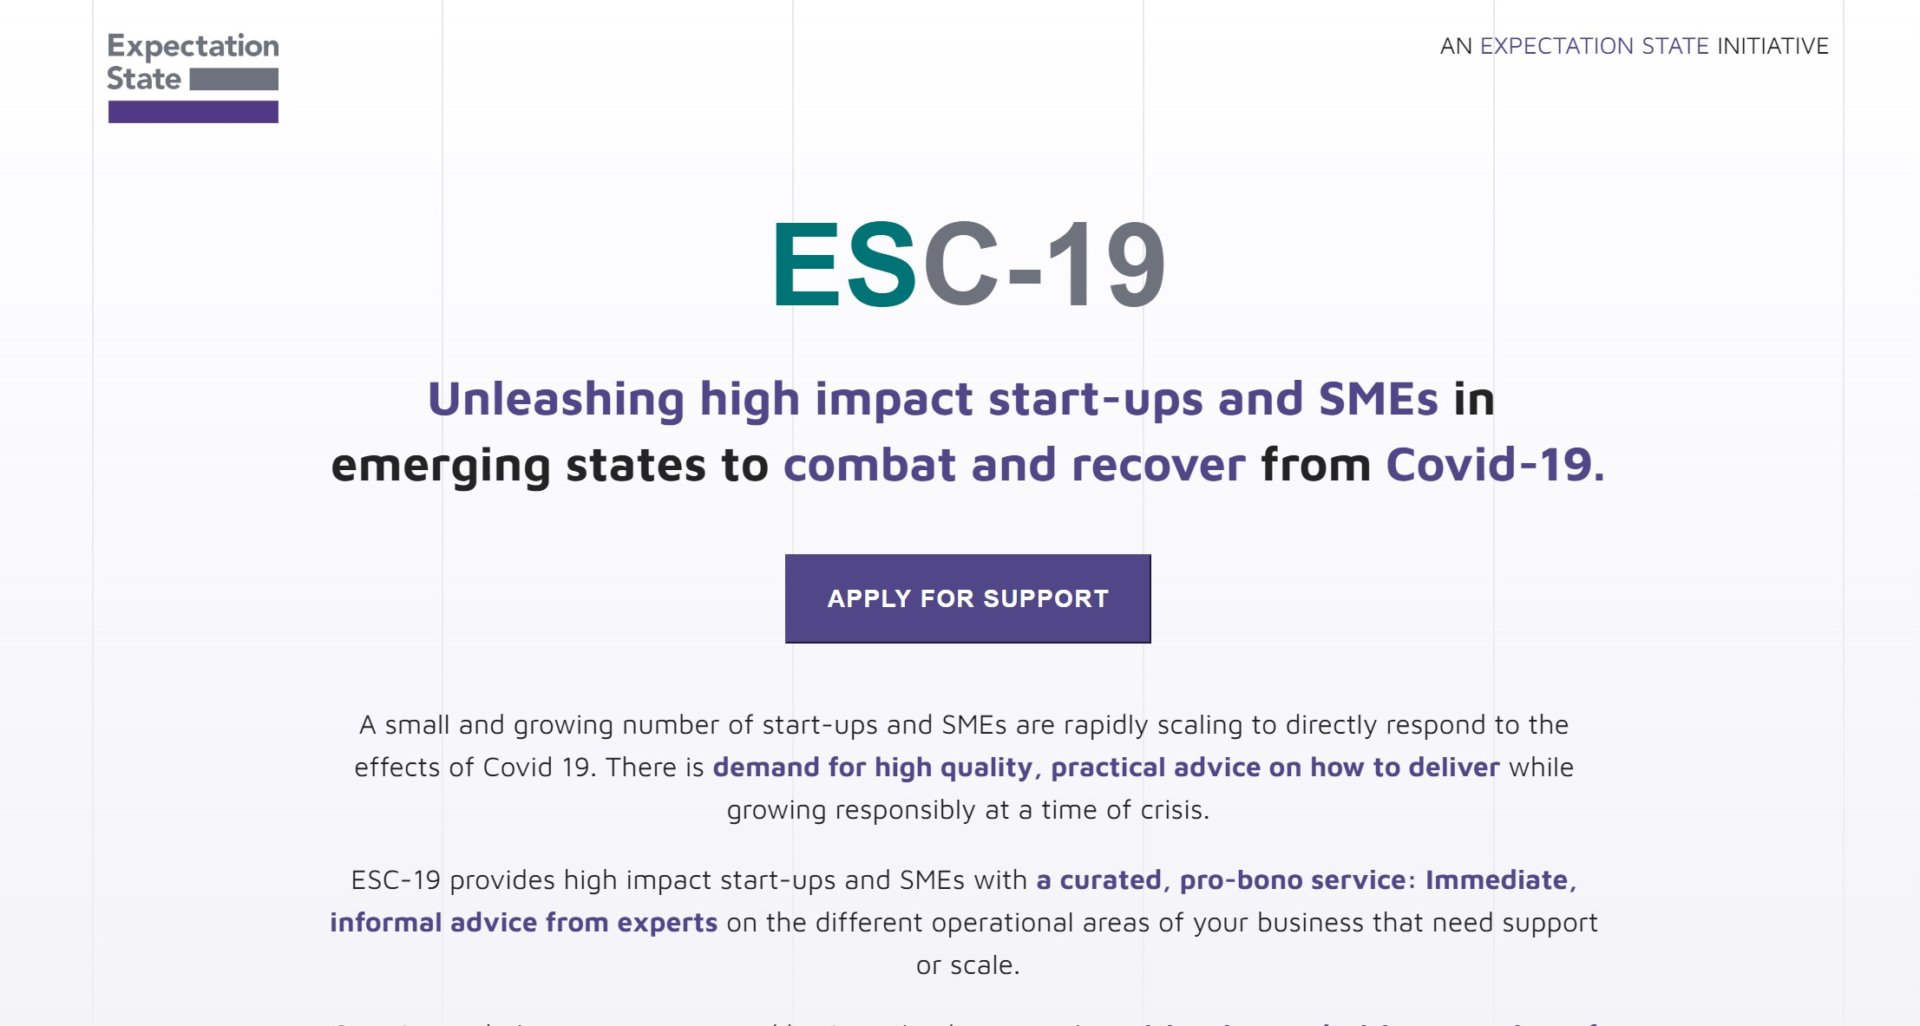 Expectation State launches ESC-19